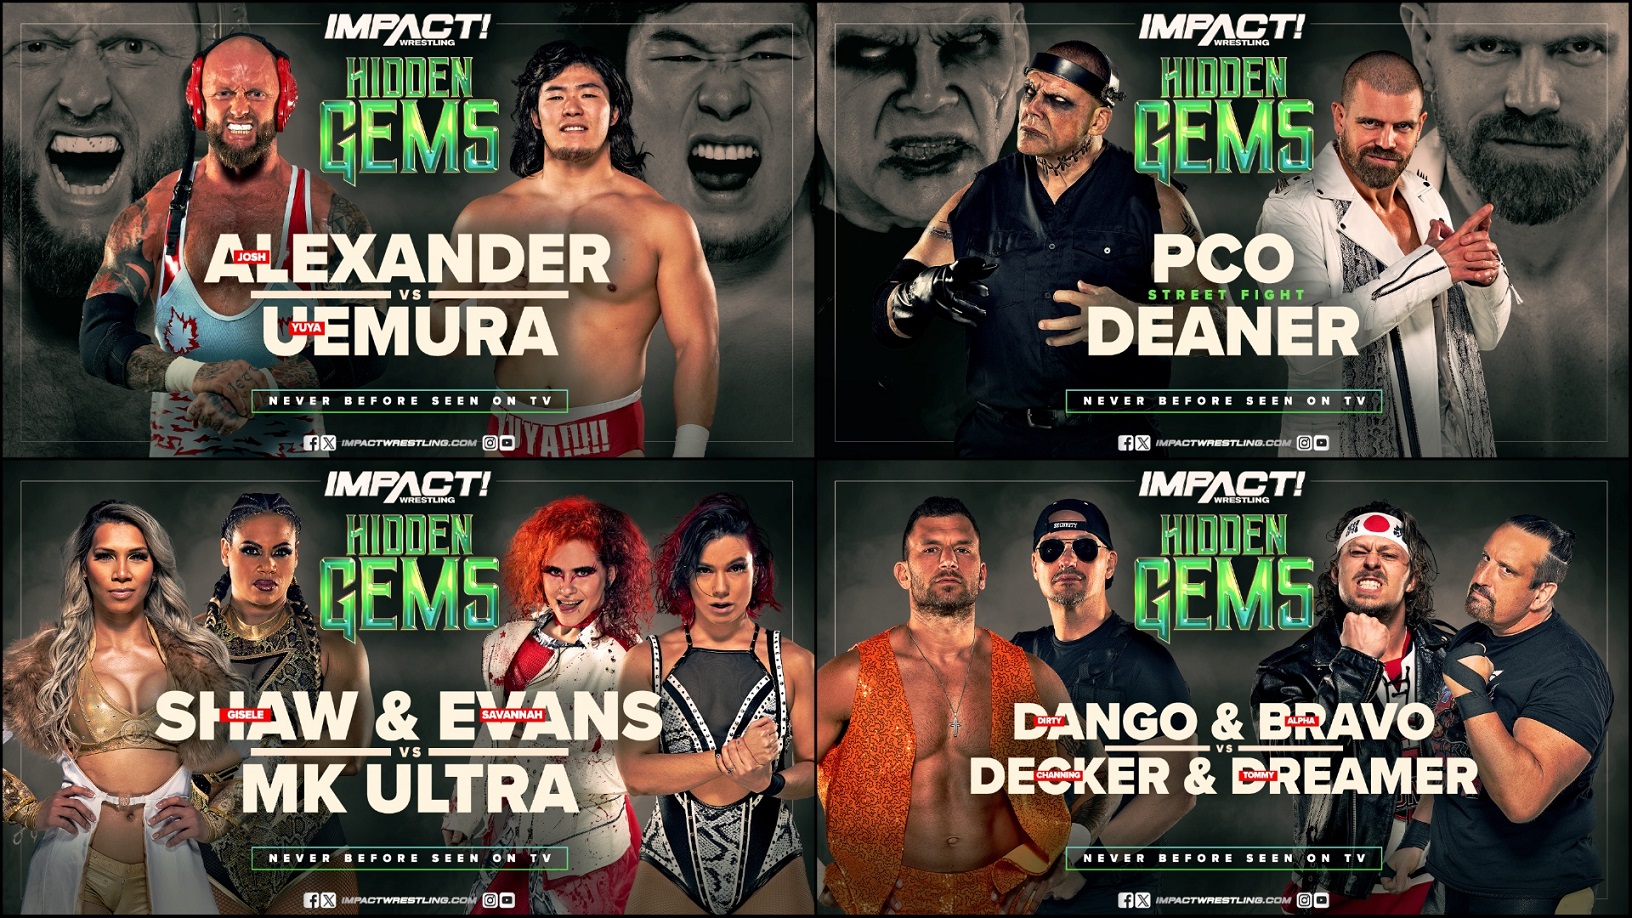 IMPACT Against All Odds 2021 Results